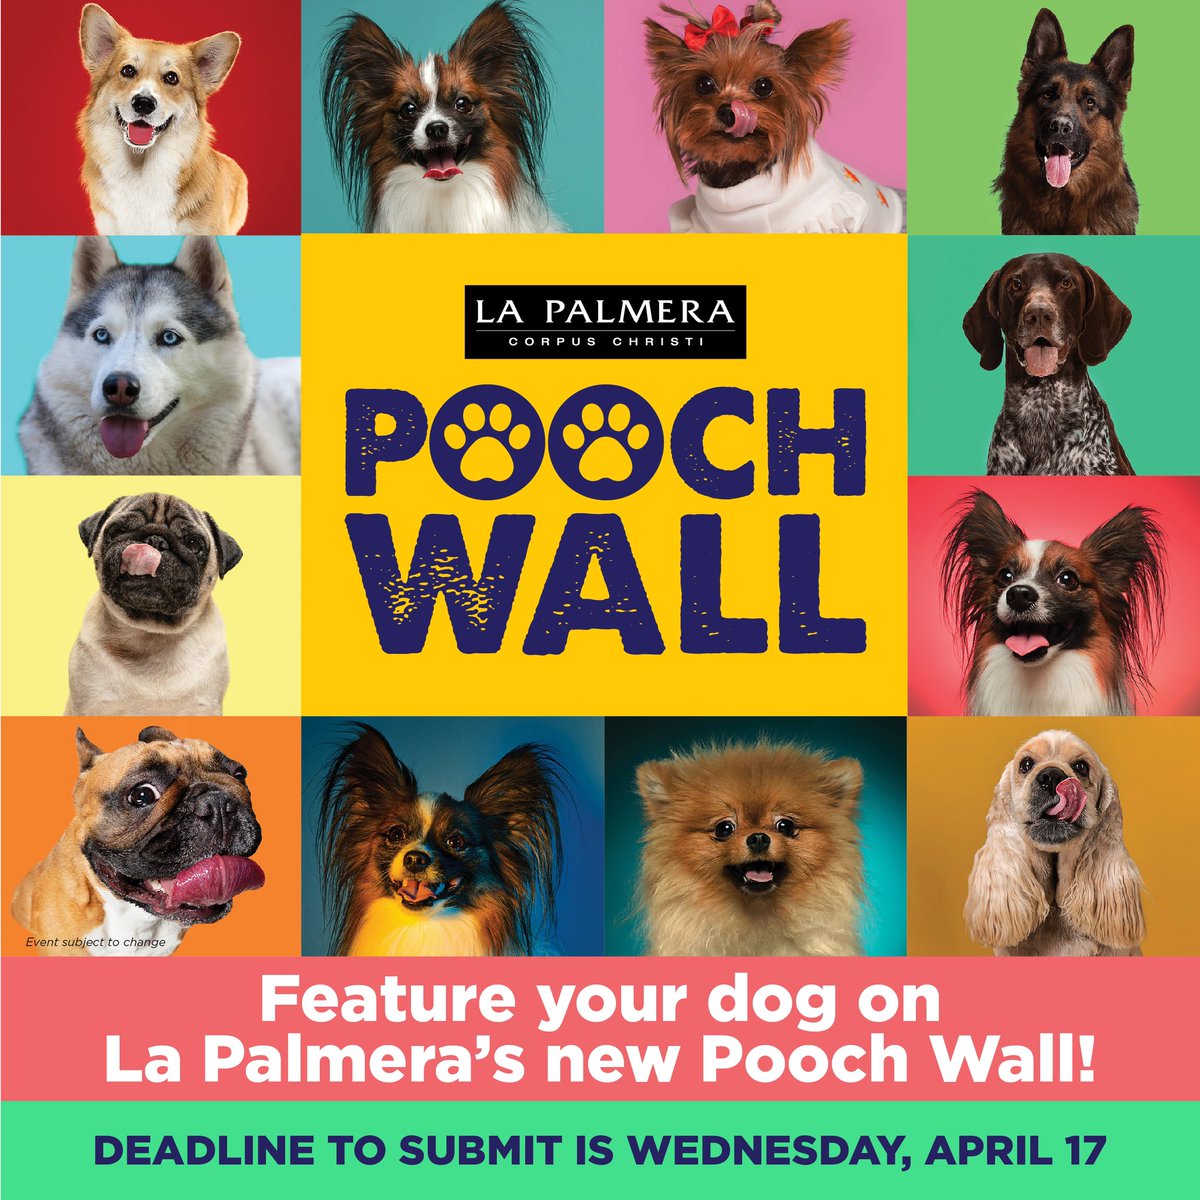 La Palmera is creating a permanent 'Pooch Wall' mural filled with pictures of shoppers' pets! For your dog to be considered as a featured pet, please email a hi-resolution photo to lapalmerainfo@trademarkproperty.com with the subject 'Pooch Wall - Your dog's name' by April 17!